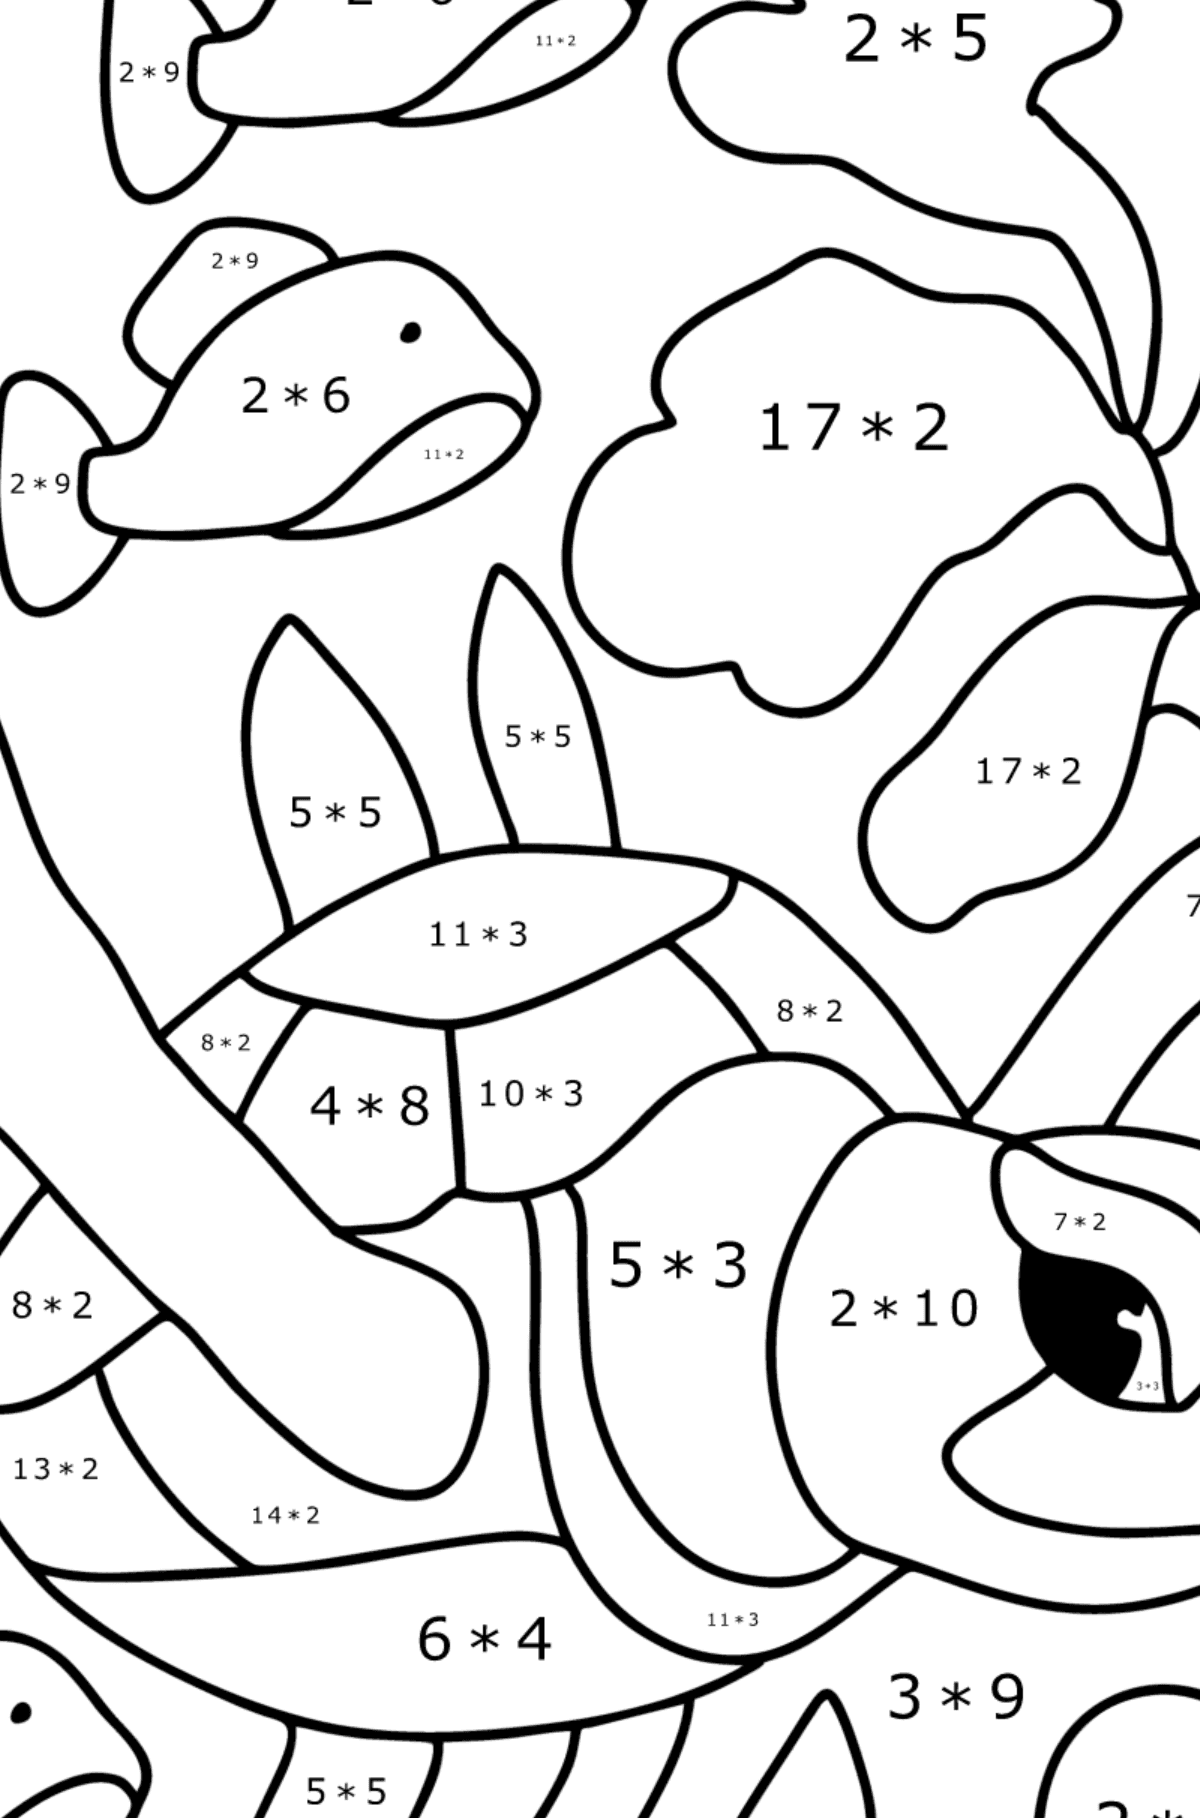 Sea turtle coloring page - Math Coloring - Multiplication for Kids